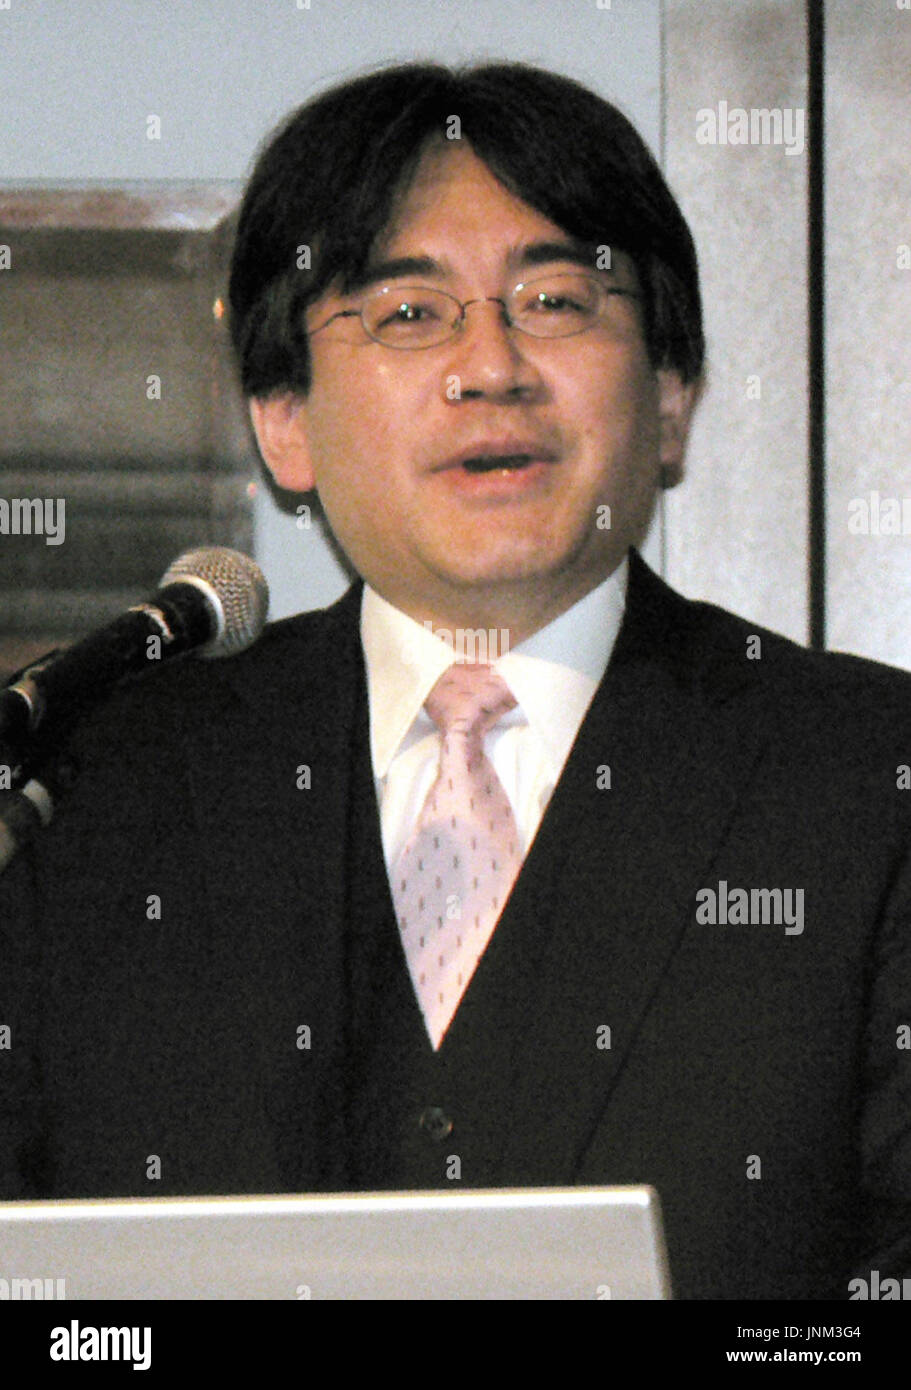 TOKYO, Japan - Satoru Iwata, president of Nintendo Co., speaks to reporters  at a Tokyo hotel on June 7. Iwata said that shipments of its hand-held  Nintendo DS game machine reached 8.4